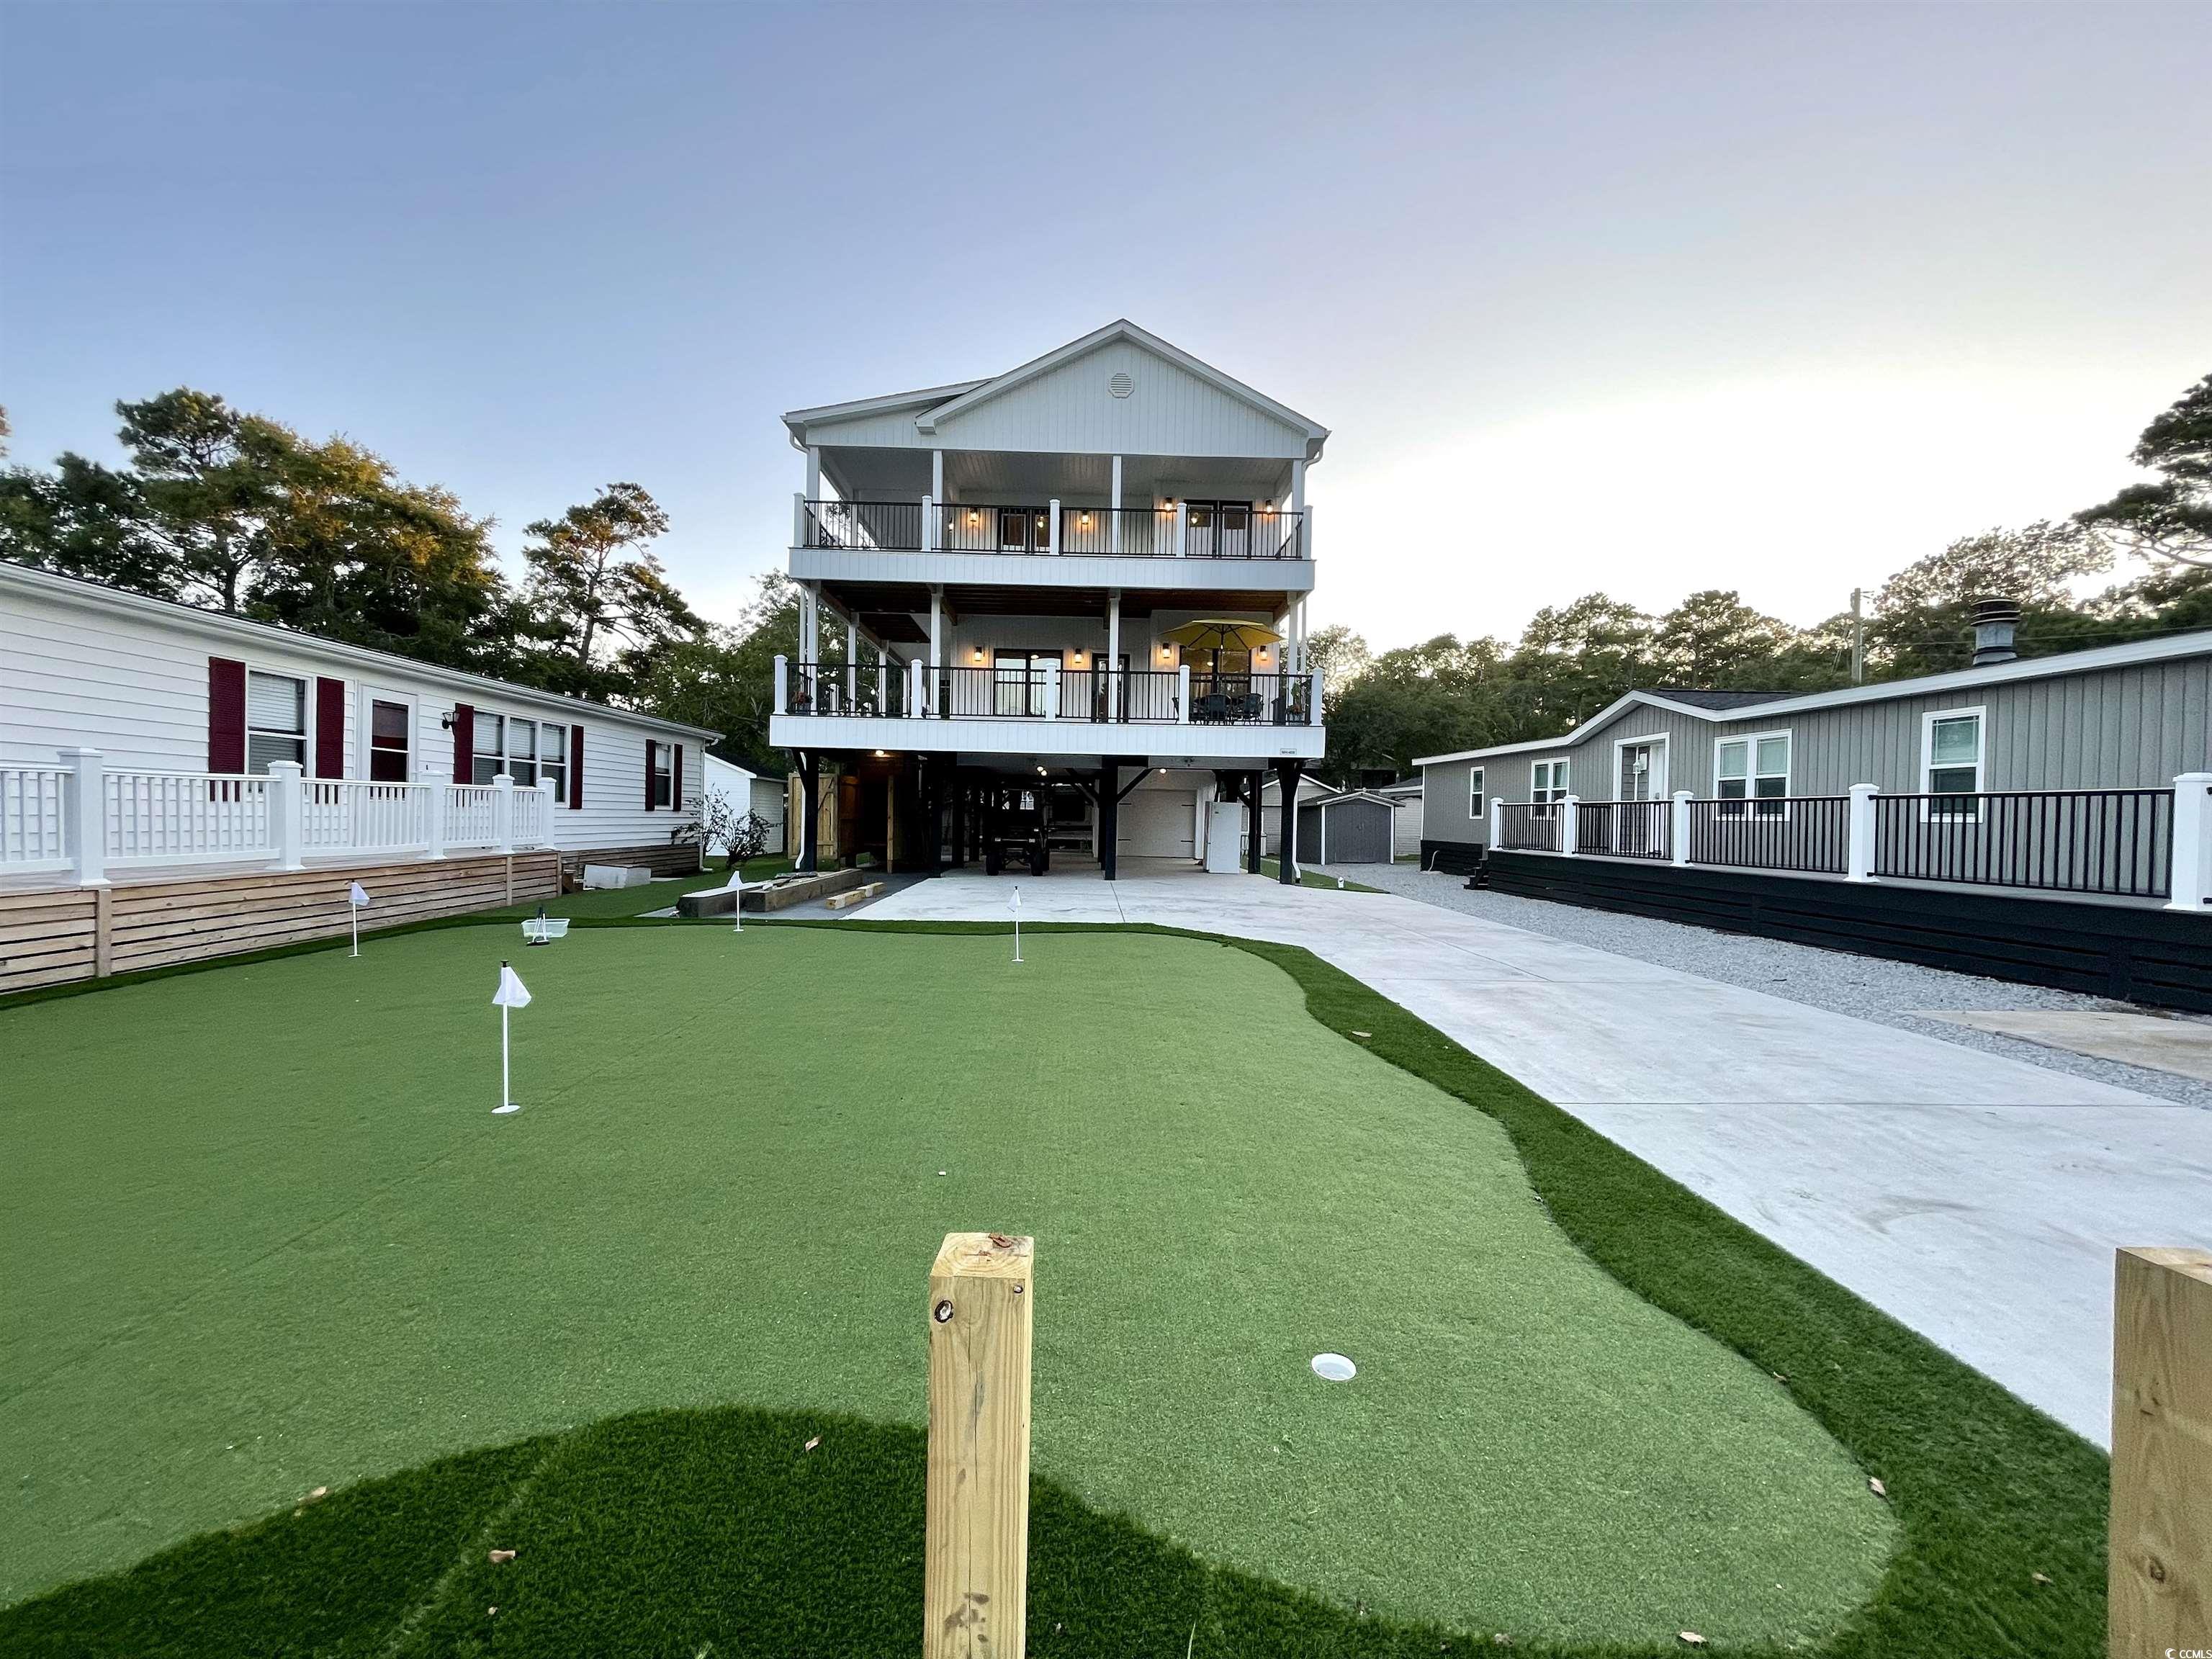 introducing "putt-ing on the beach!" this unique new construction home, completed in 2023, is virtually maintenance free and sits on an extra large double lot (by my count parking for 12). an easy walk to the beach, park and rec center. well-appointed with loads of upgrades including a private, 7 hole, putt-putt green in the front.  ditch the lawn mower because this home is surrounded by astroturf.  5 bedrooms, 4 1/2 baths with 1445 square feet of porches that were constructed with trex composite decking, another low maintenance feature (double front and side covered porches). walk through the front door and fall in love with the attention detail. bright furnishing and decor, hand chosen to bring the beach indoors. the gourmet kitchen features staggered white cabinets with crown molding, solid surface counter tops, a large center island with seating for 4 and samsung appliances. the owner's suite is located on the first floor and boasts a beautiful walk-in shower, dual vanities and built in cabinets for extra storage. walk upstairs and you will find 2 bedrooms to the rear of the home each with vaulted ceilings and share the hall bathroom. to the front of the upstairs, you will find 2 master suites each with its own private bathroom, vaulted ceilings and french doors that lead out to the massive upper deck with views for days. luxury vinyl plank flooring though-out, which is not just aesthetically pleasing but also durable and waterproof.  a 2002 club car with new batteries will convey with home. ocean lakes family campground has top-of-the-line amenities, include both an indoor and outdoor pool, lazy river, dump zone for your toddlers, arcade, mini golf, dog park, and private access to the beach.  voted best family campground year after year and winning numerous trip adviser awards and still family owned. ocean lakes has a full summer schedule for all ages and a full winter schedule to meet all your retirement dreams as well. come and take a look today. welcome home!